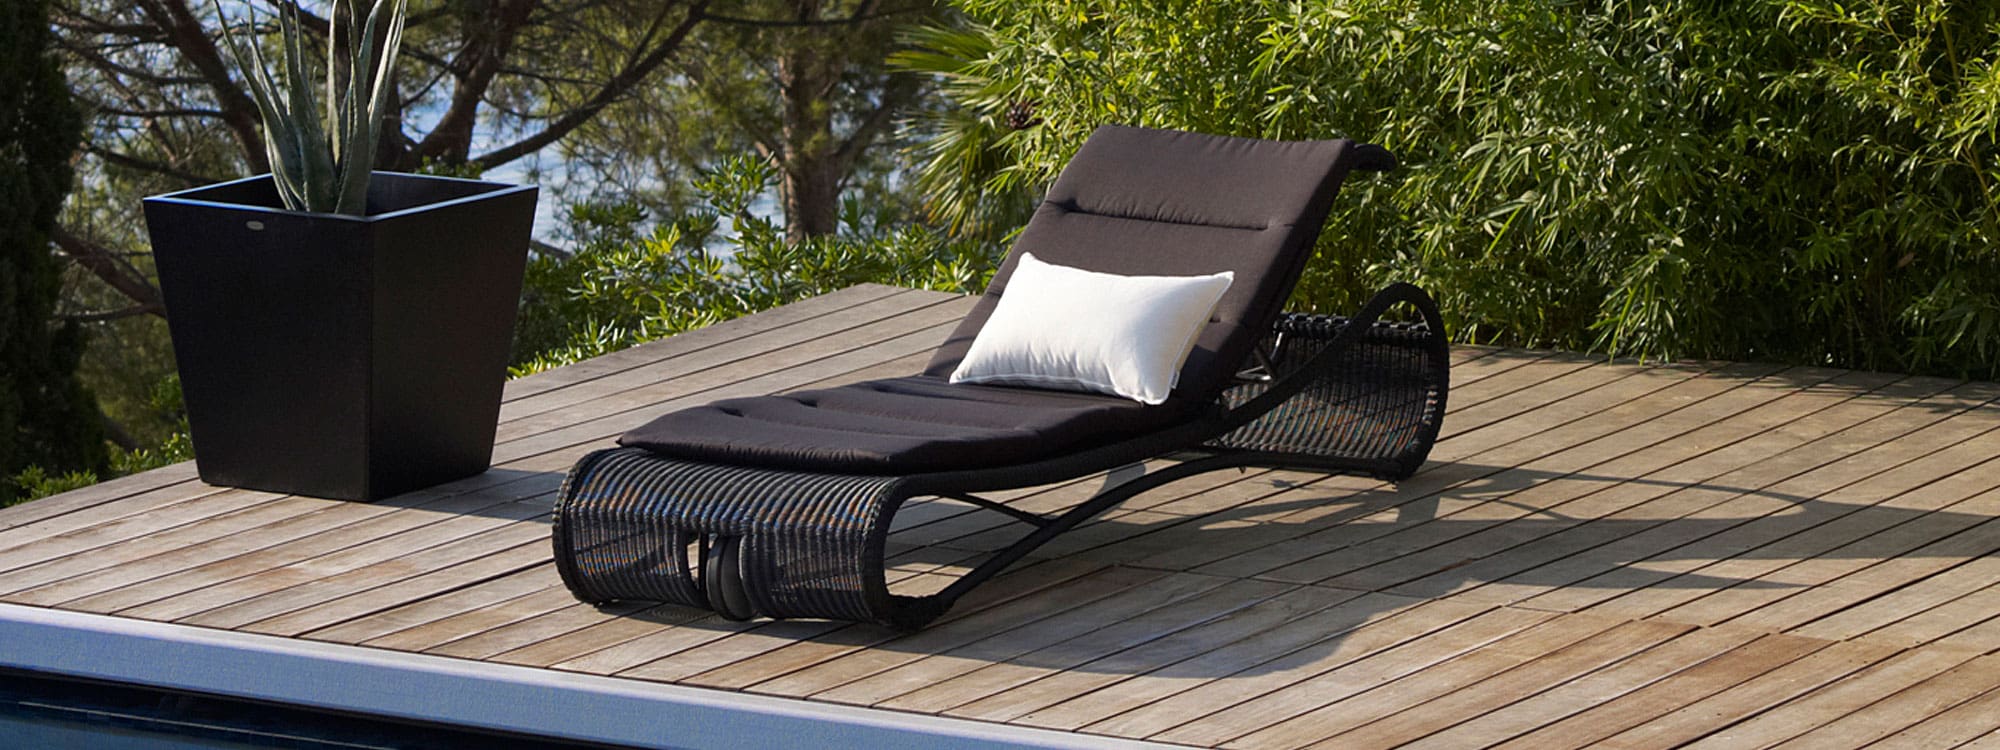 Image of Escape modern sun lounger in black Cane-line weave on wooden decking next to swimming pool